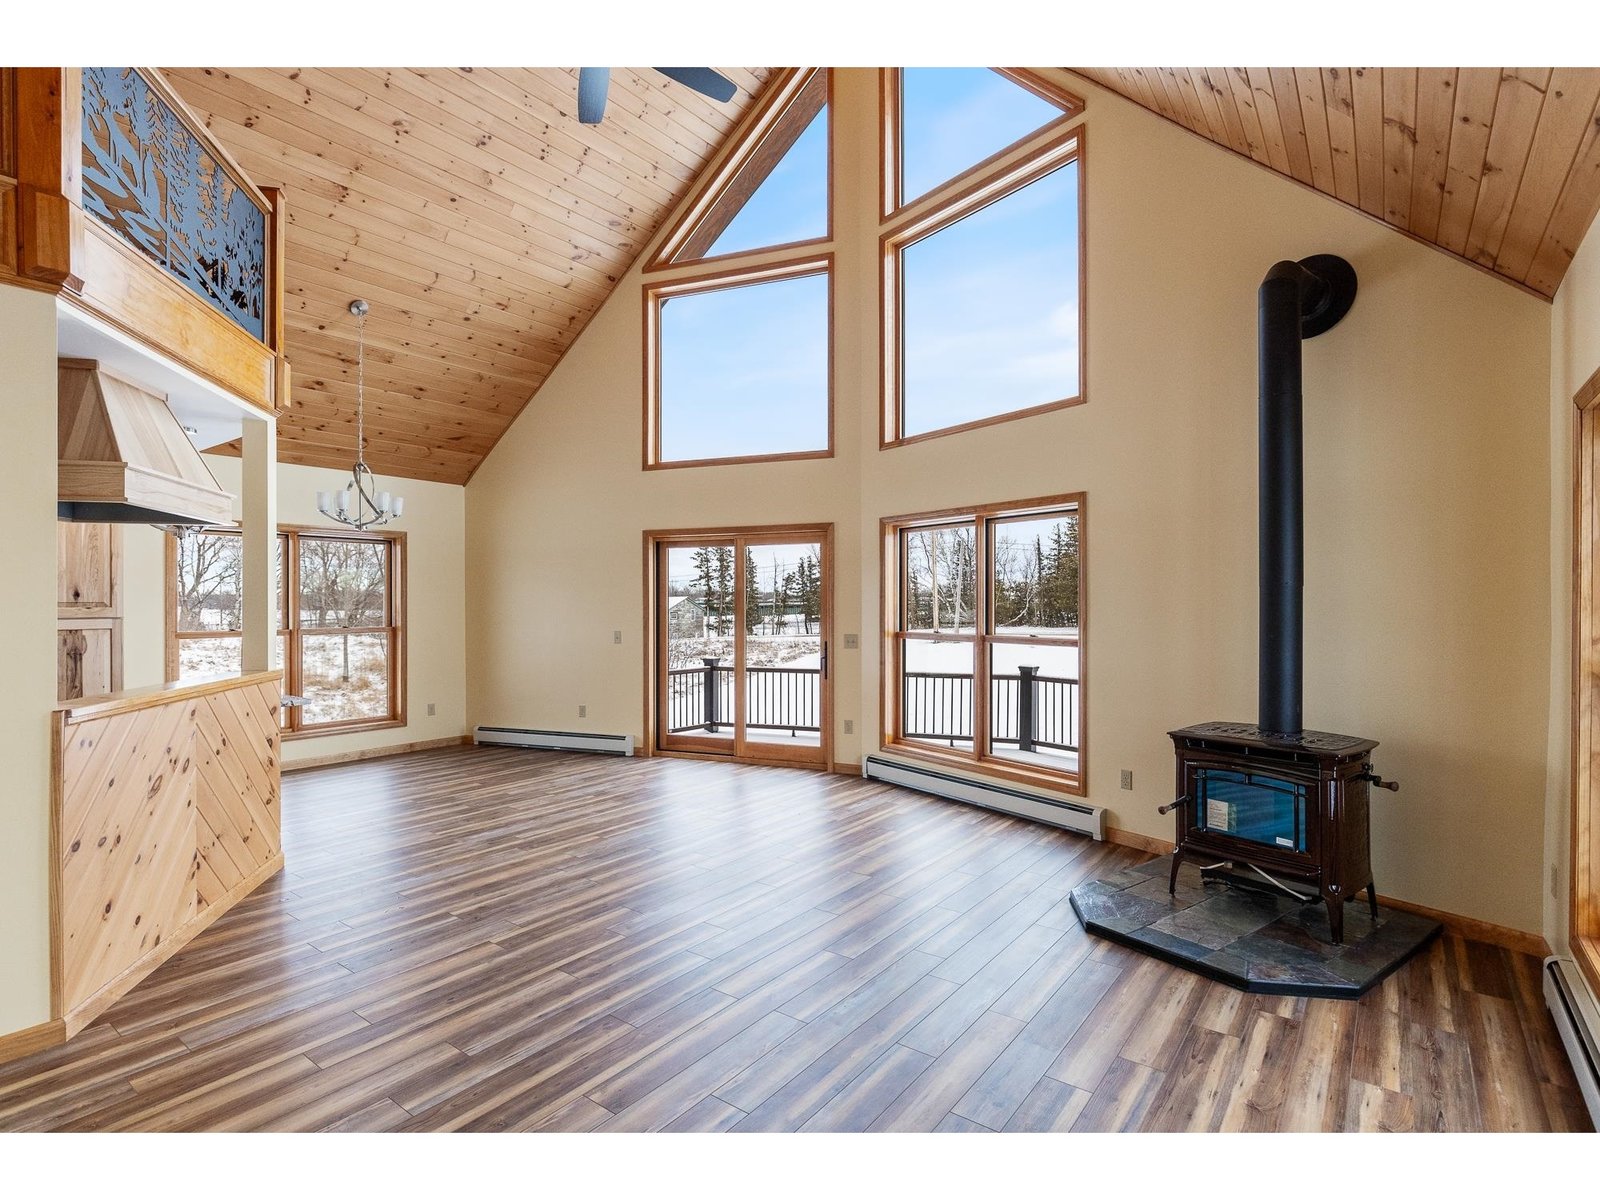 New wood stove adds warmth and Vermont ambiance